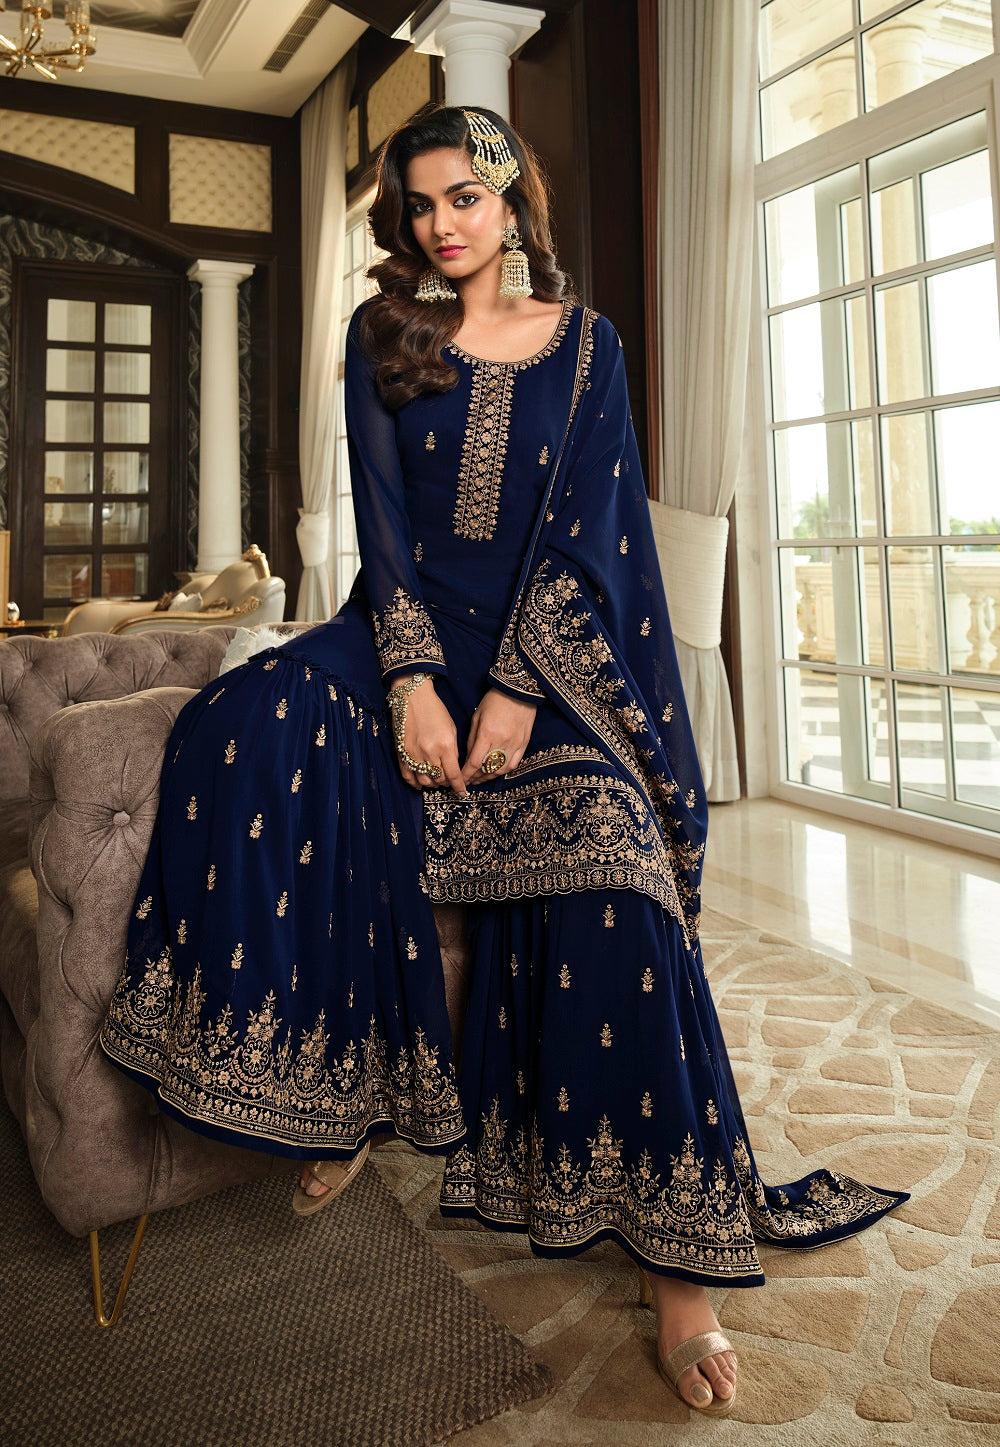 Georgette Embroidered Pakistani Suit in Navy Blue